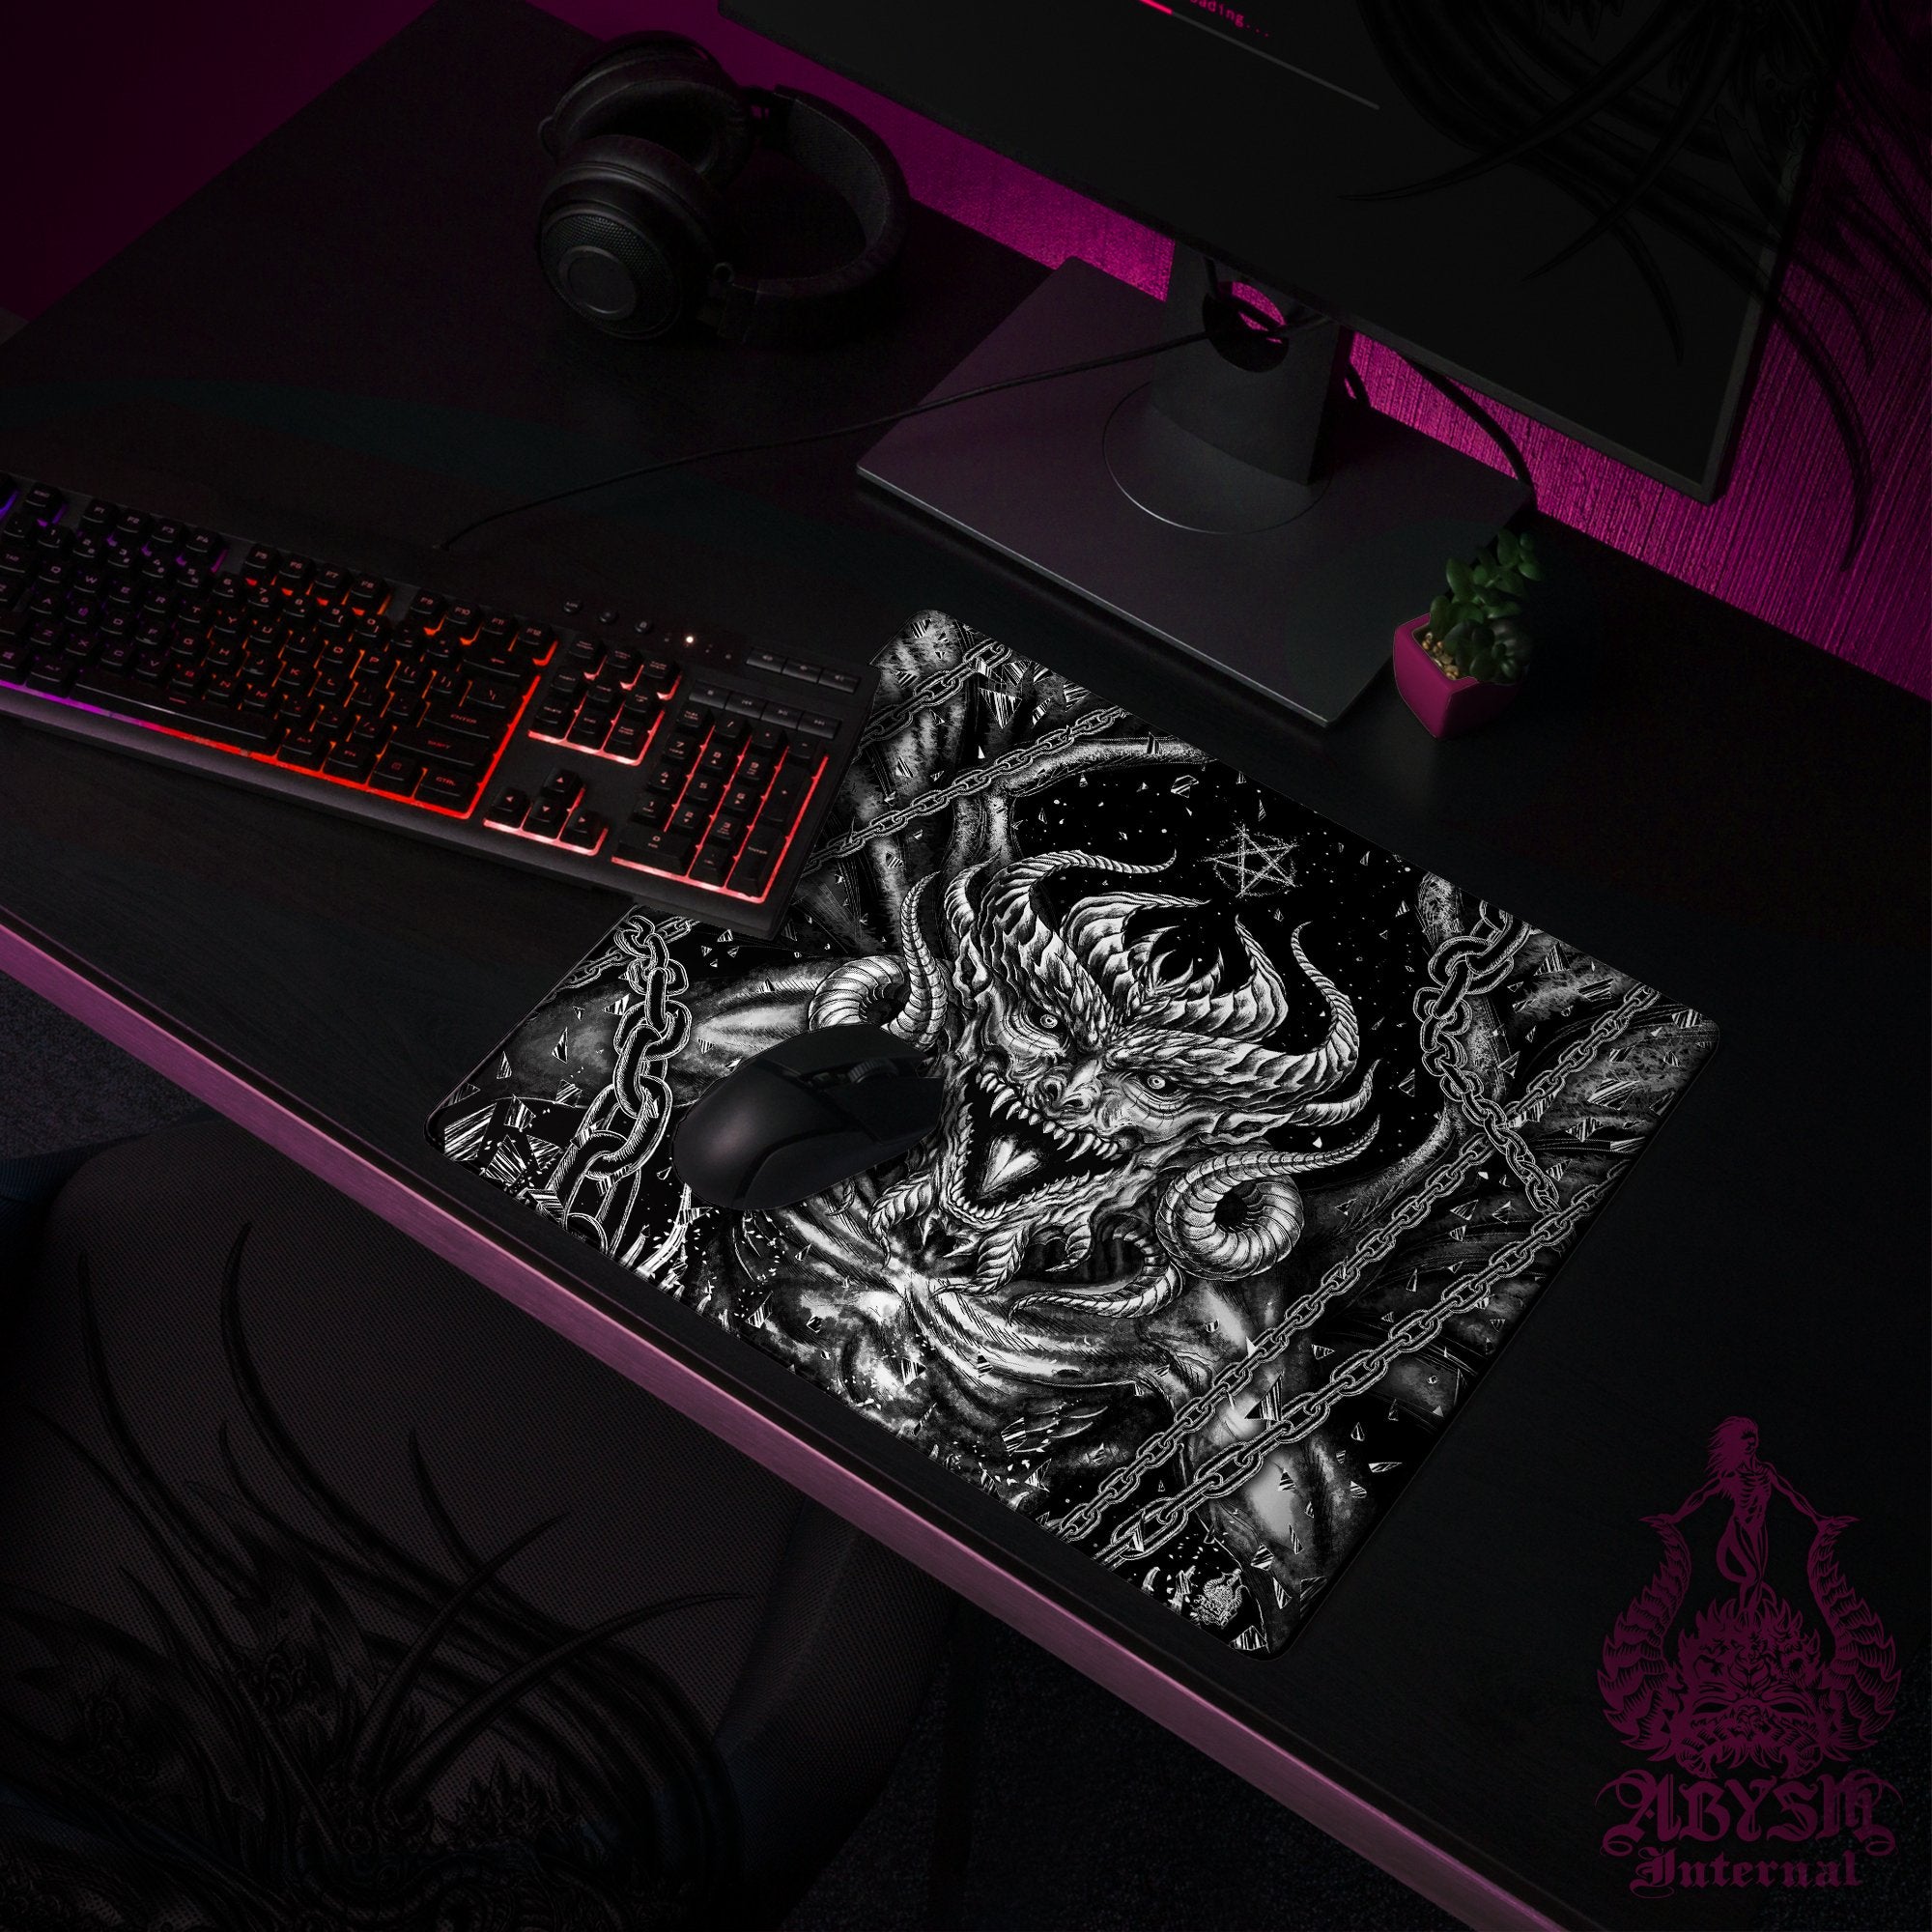 Devil Gaming Desk Mat, Goth Hell Mouse Pad, Satanic Table Protector Cover, Gothic Pentagrams Workpad, Dark Fantasy Art Print - Abysm Internal